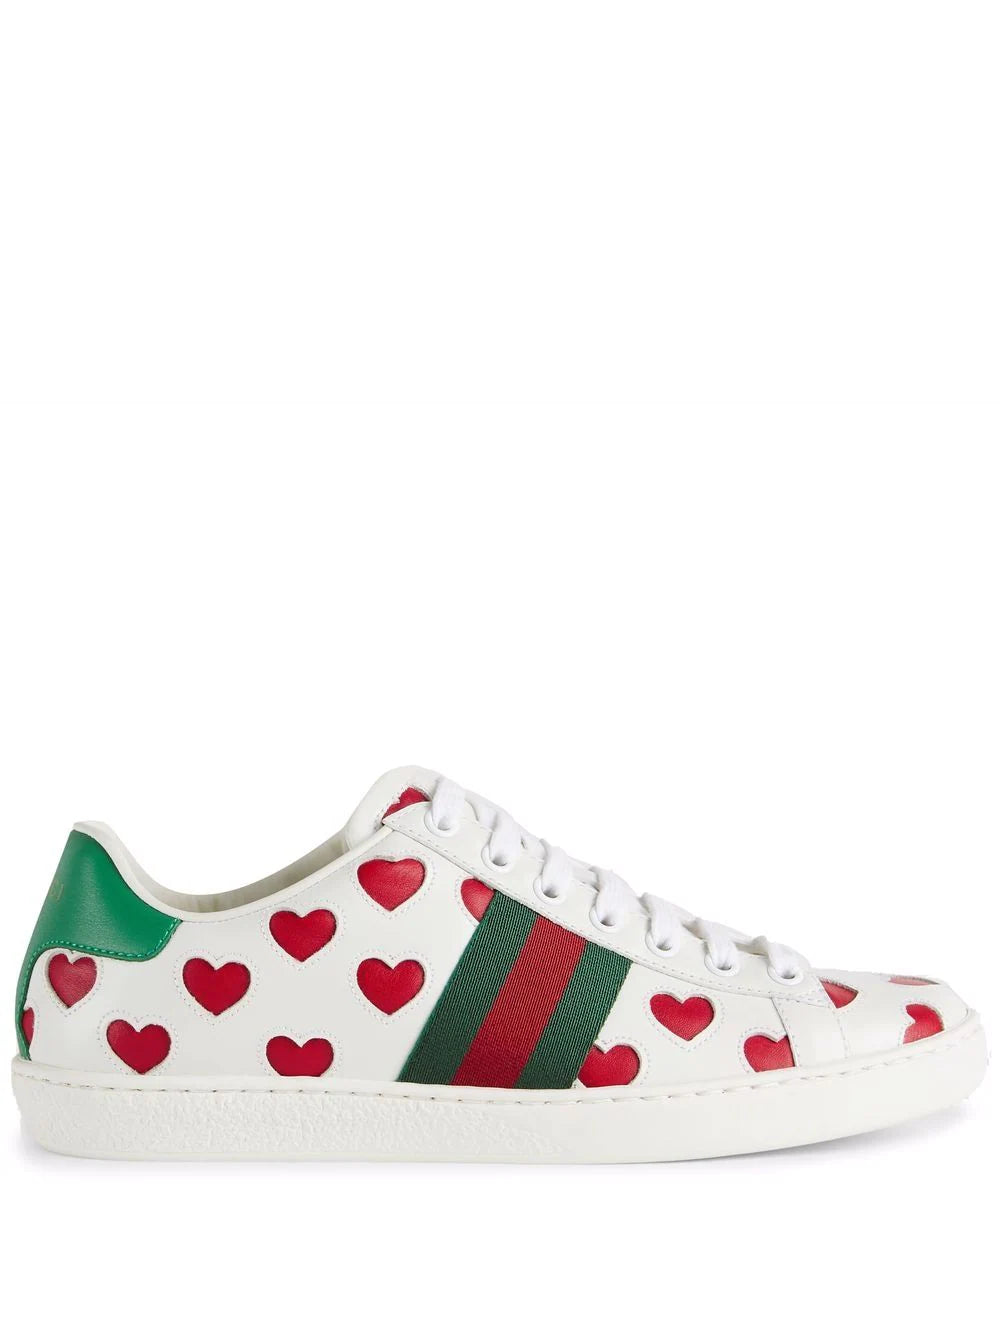 Gucci Ace lace-up sneakers Joseph